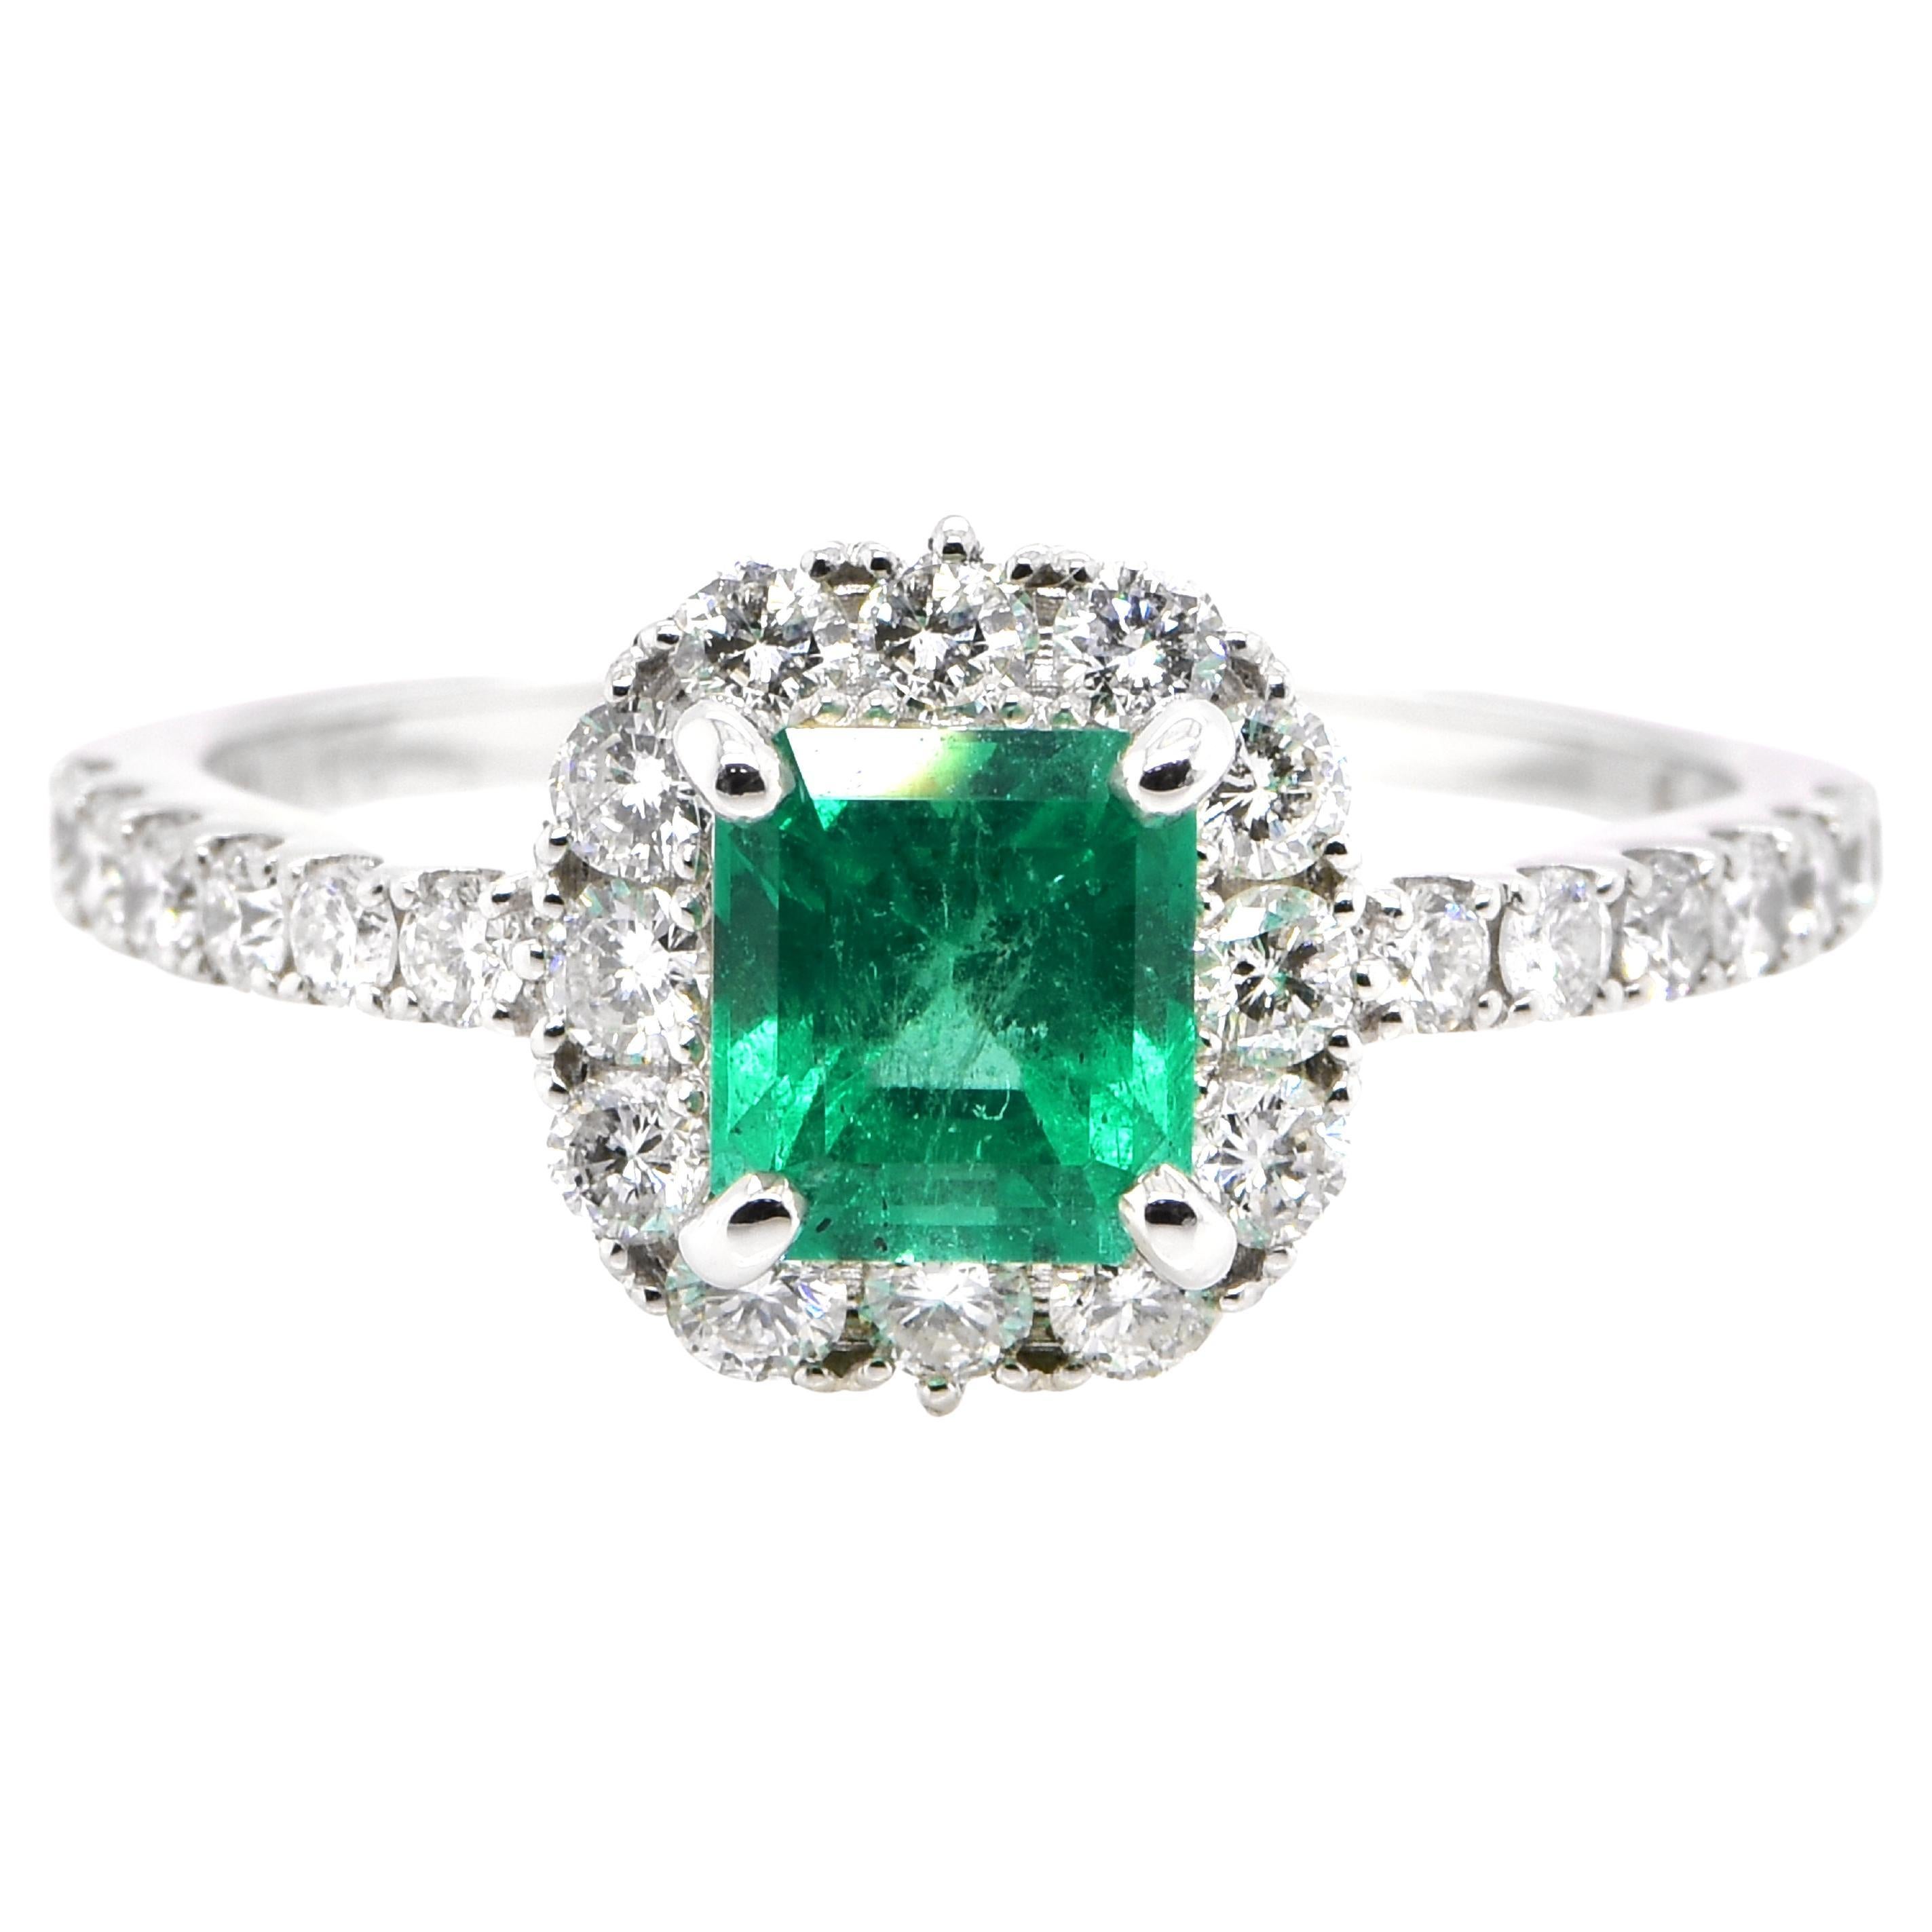 1.05 Carat Natural Colombian Emerald and Diamond Halo Ring set in Platinum